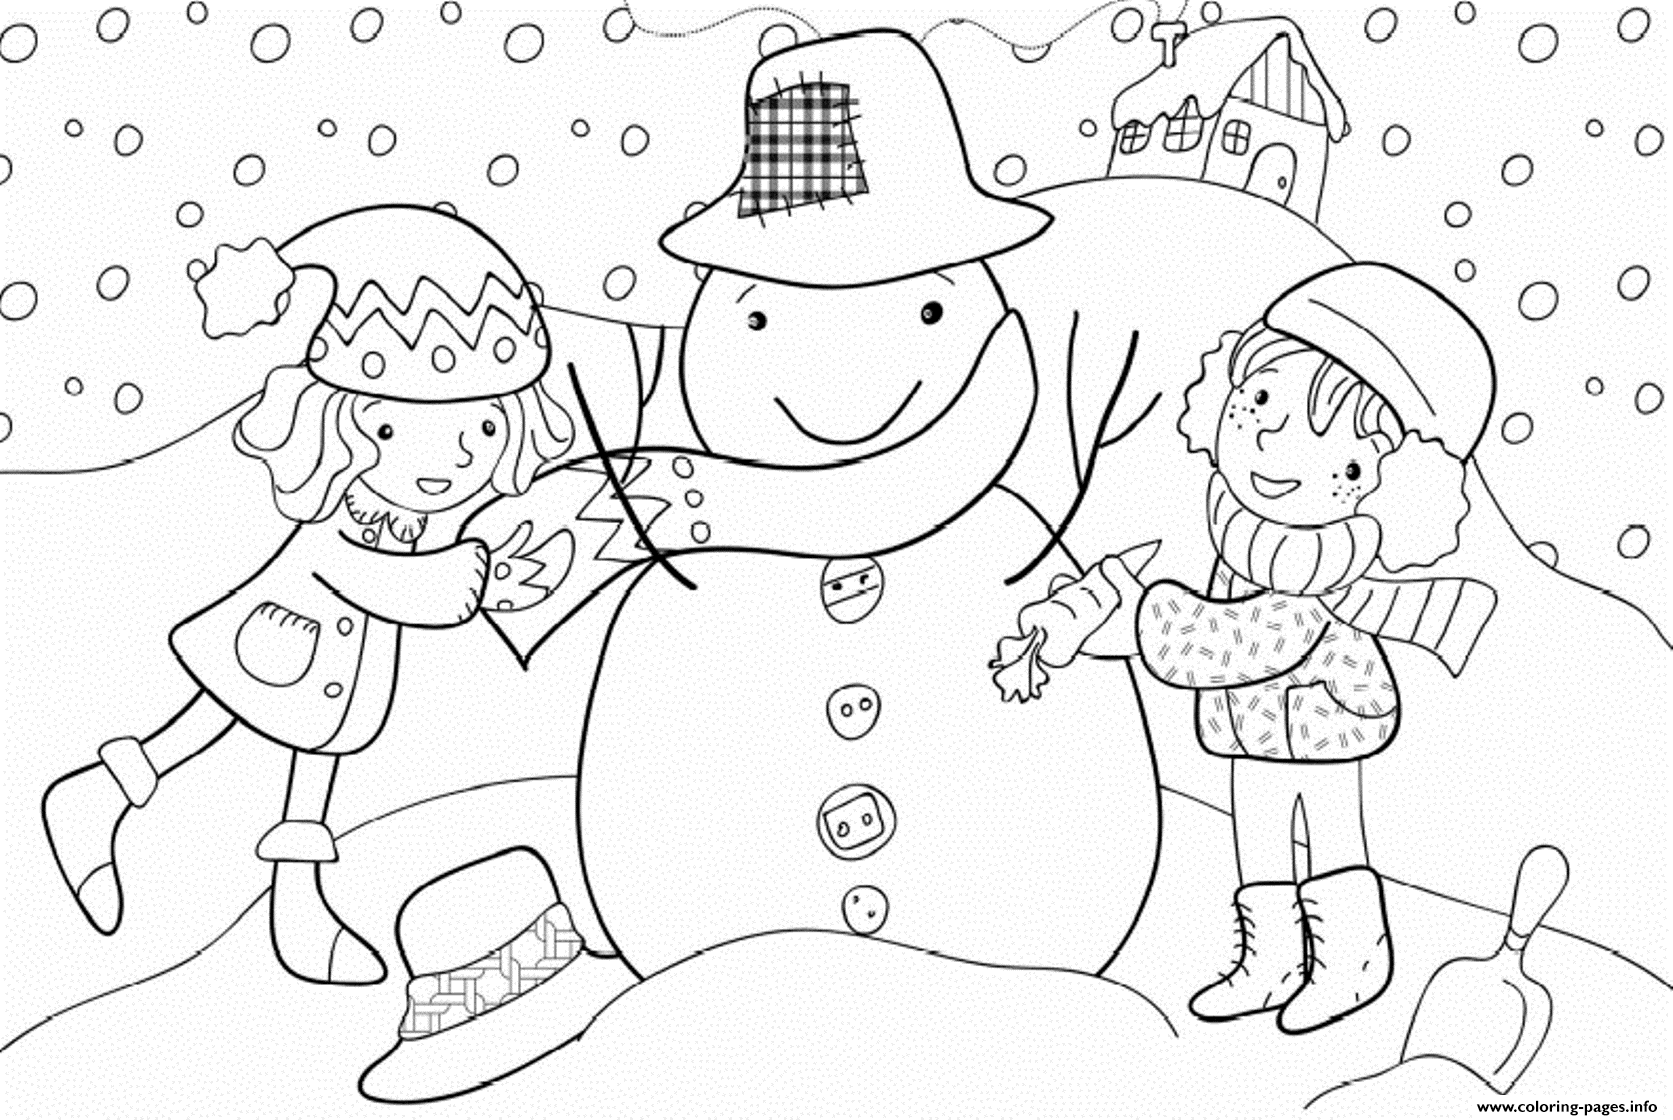 kids-winter-509b-coloring-pages-printable